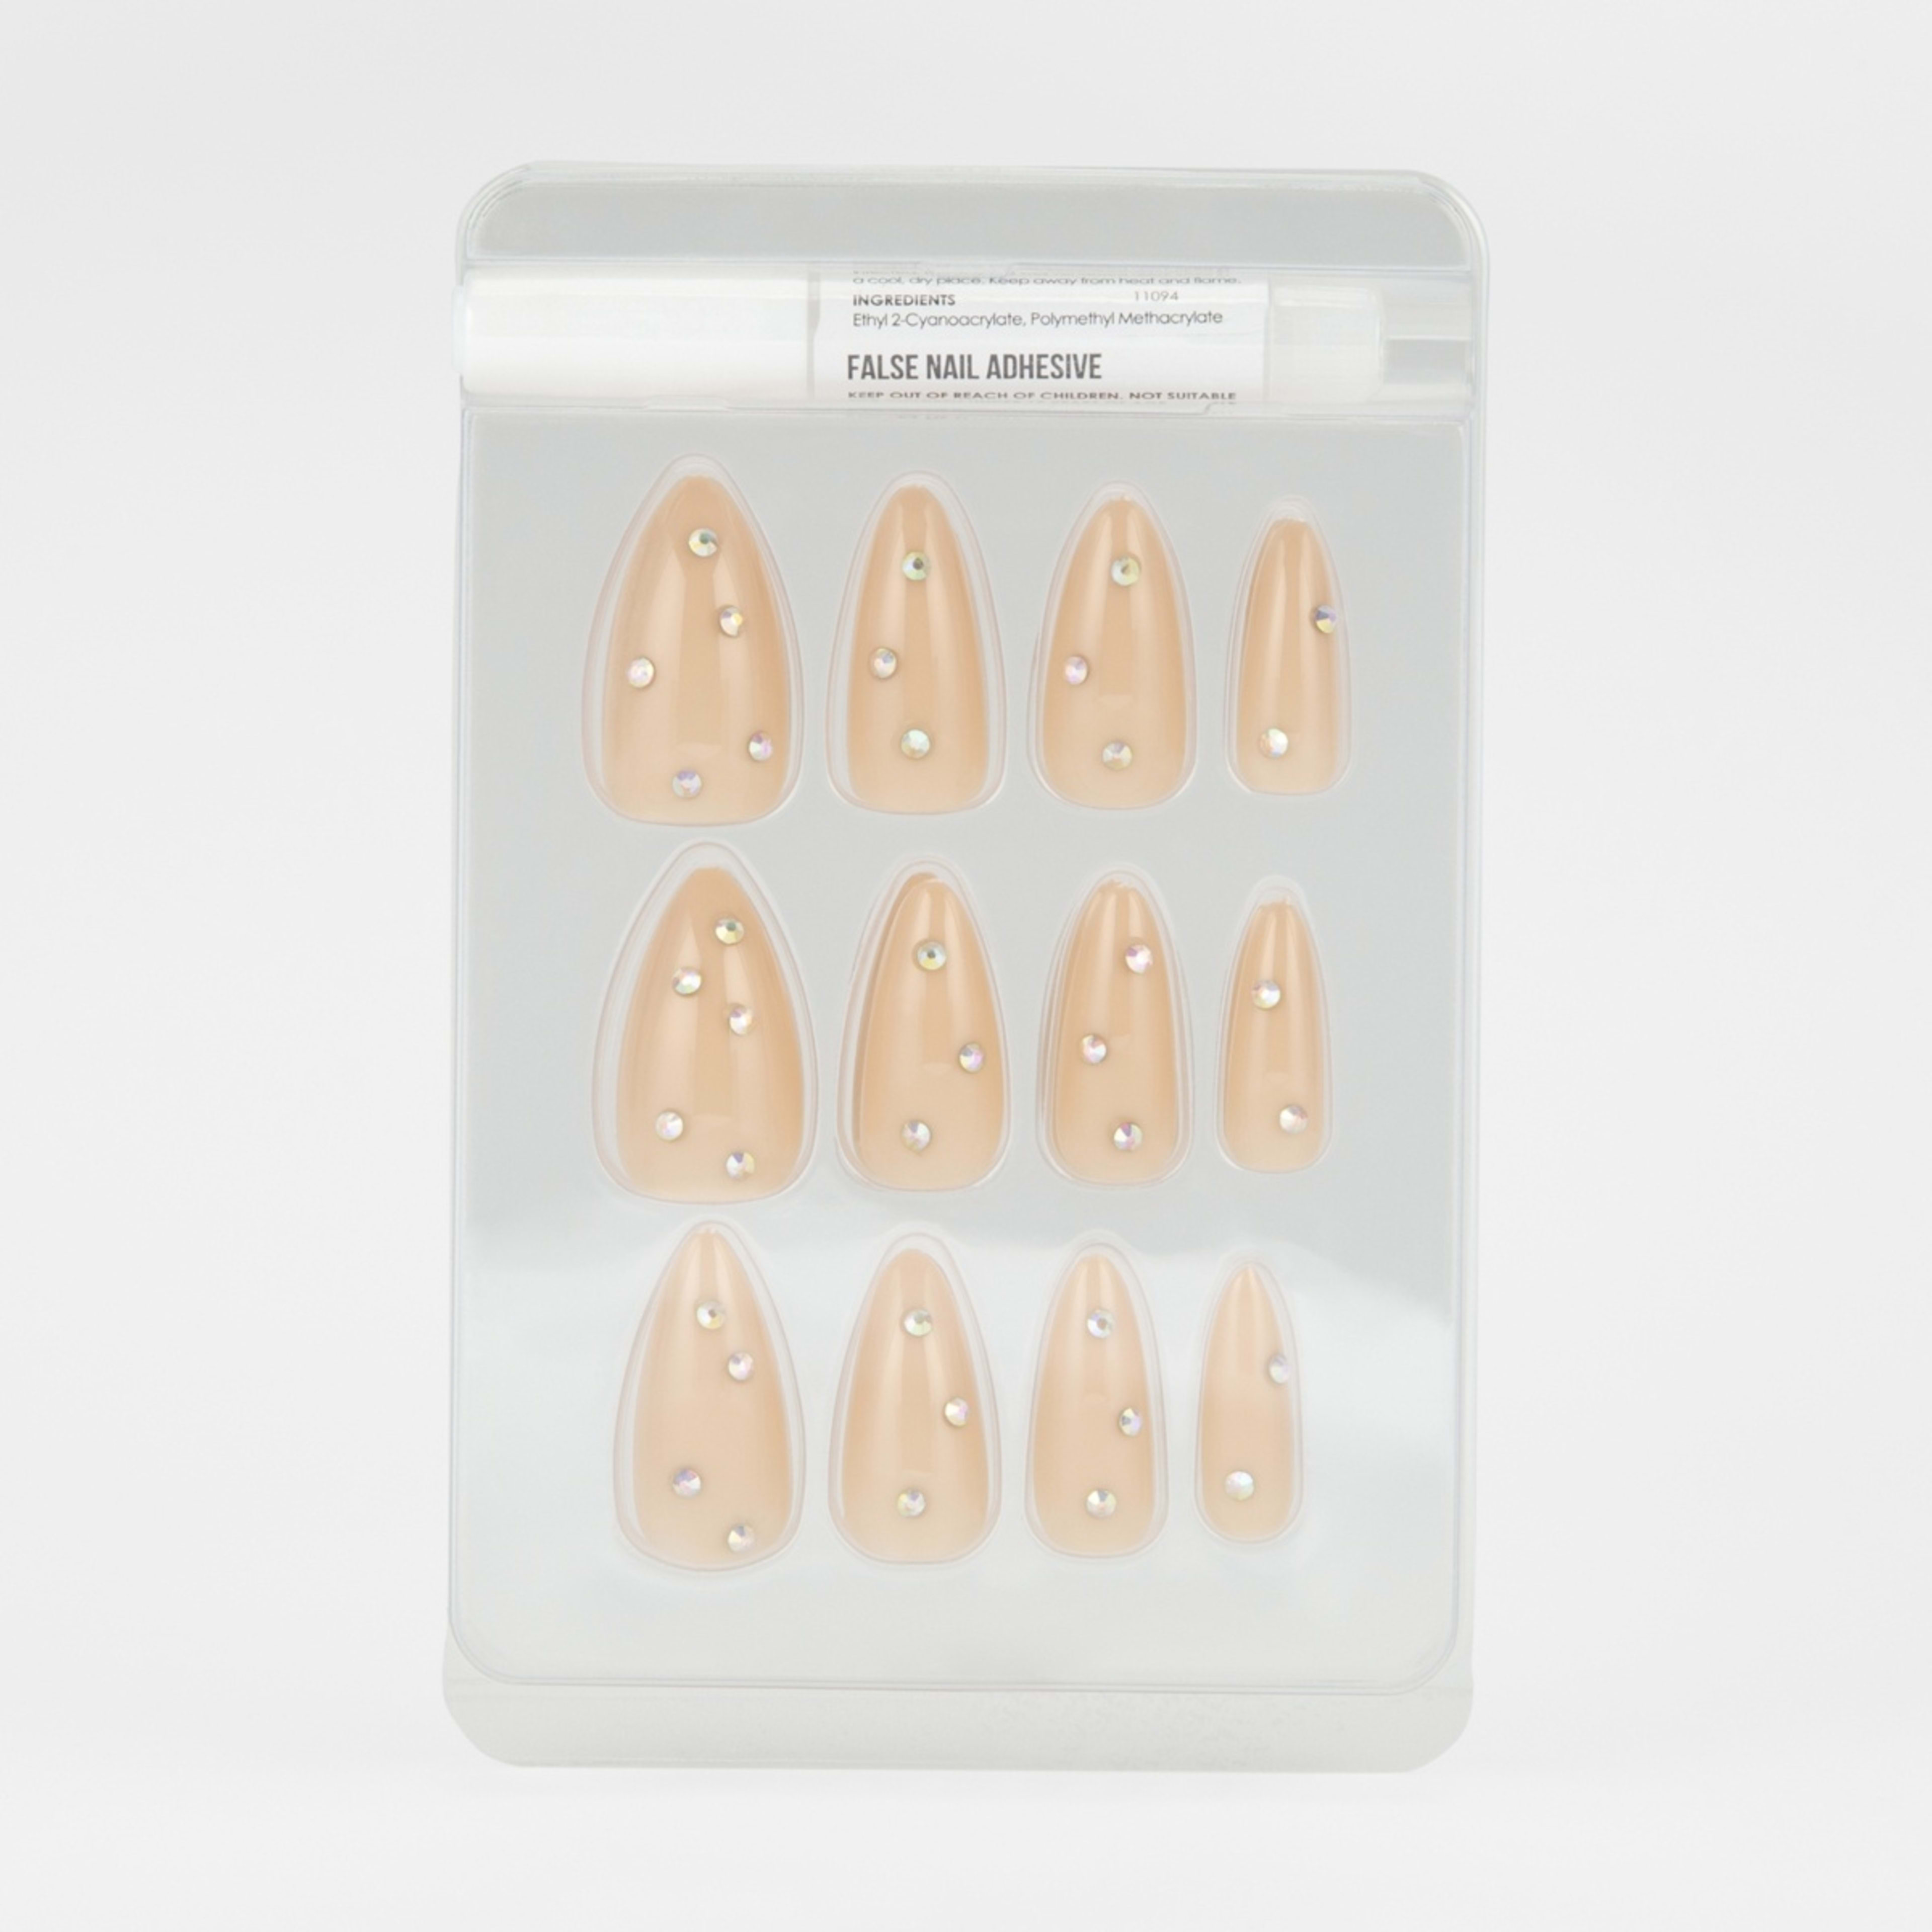 OXX Cosmetics 24 Pack False Nails with Adhesive - Stiletto Shape, Nude ...